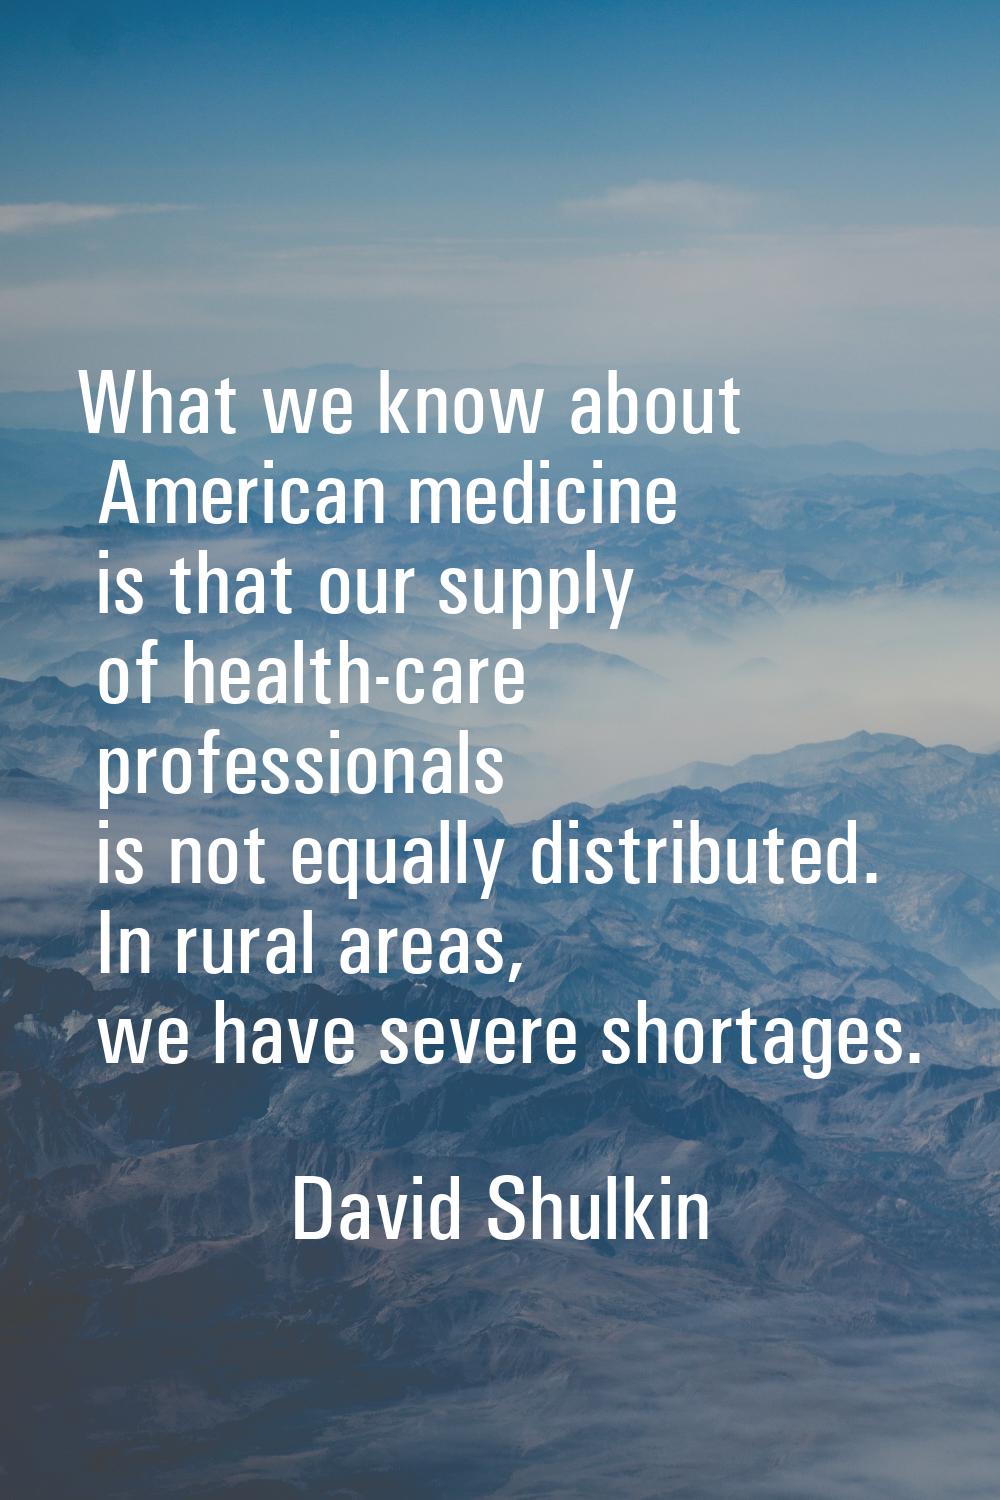 What we know about American medicine is that our supply of health-care professionals is not equally